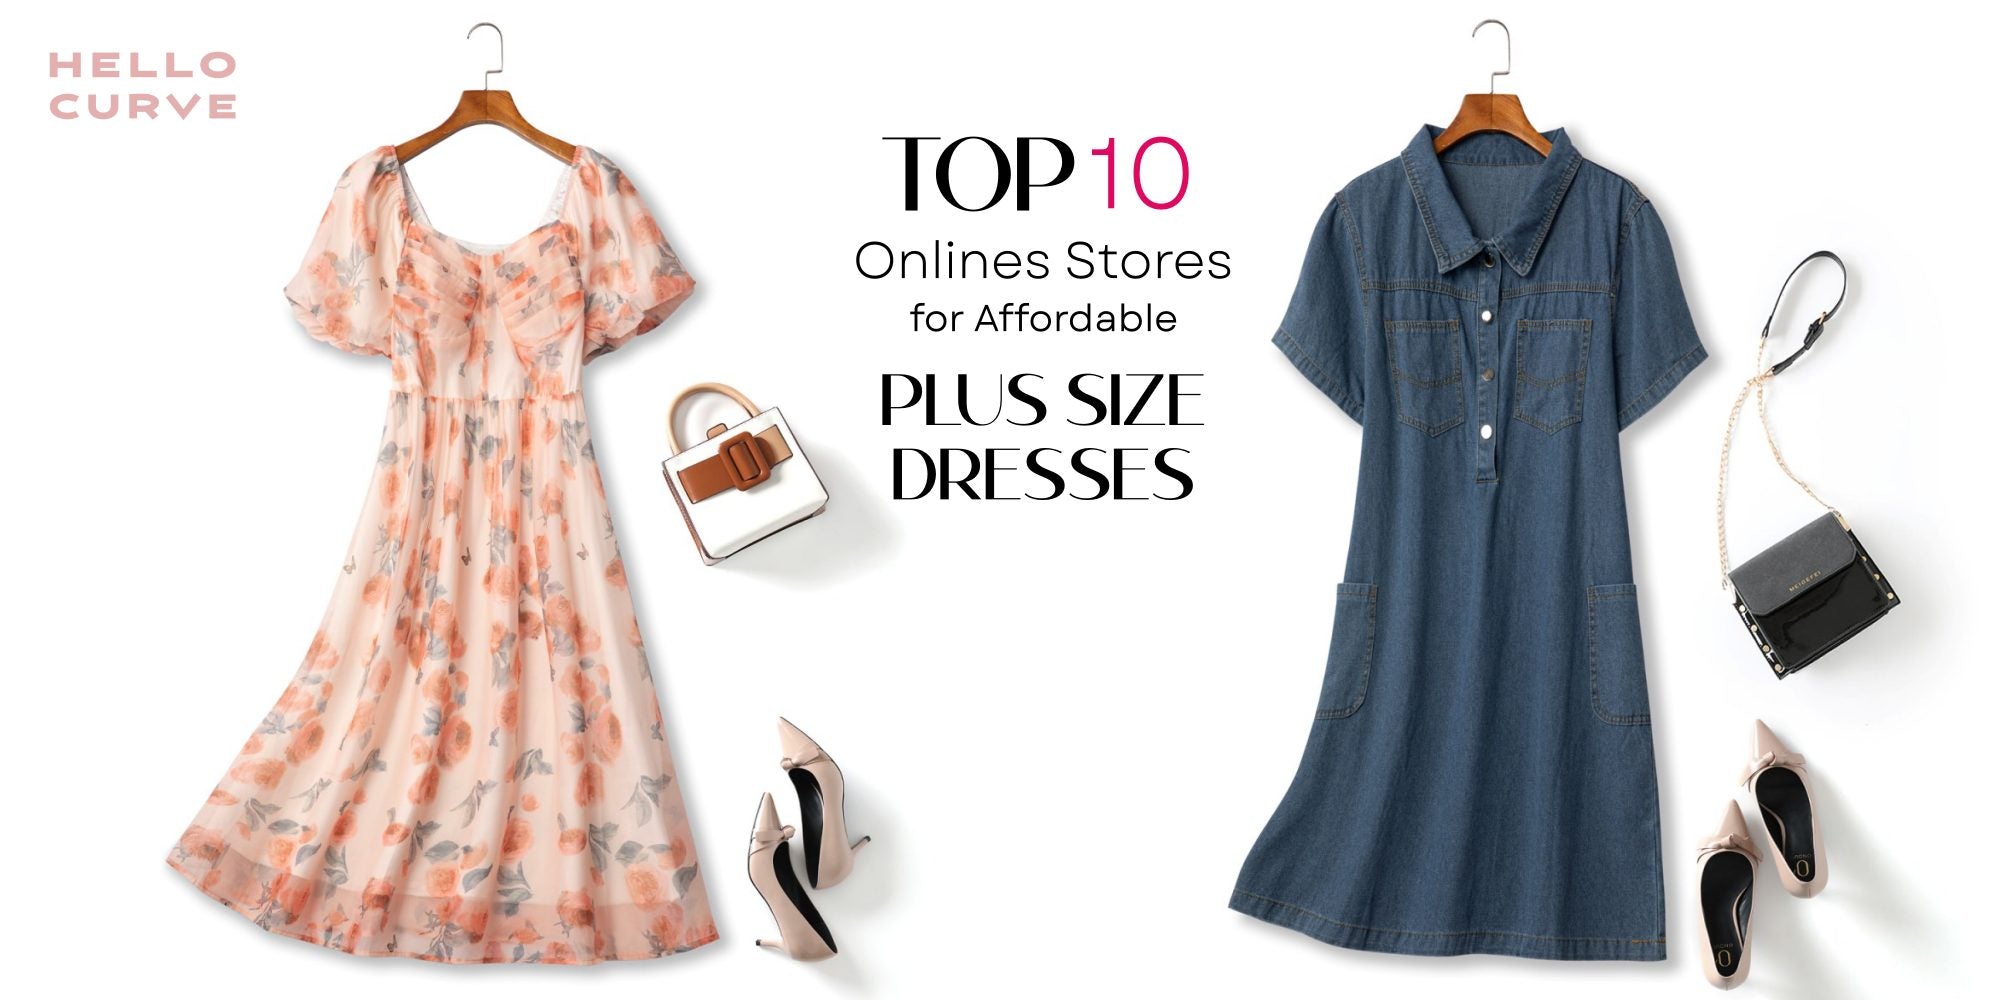 Top 10 Online Stores for Affordable Plus Size Dresses